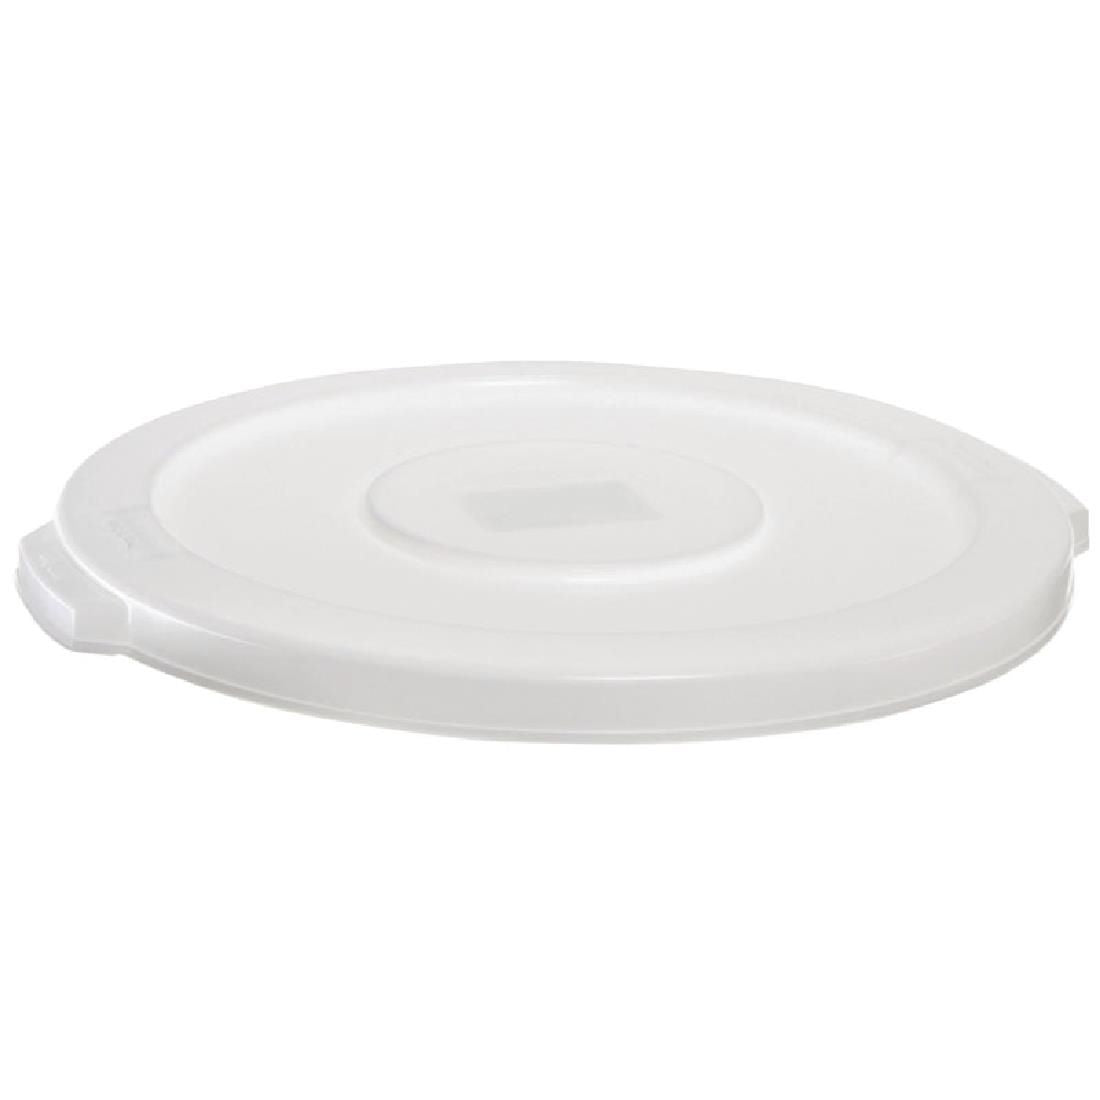 L661 Rubbermaid Round Brute Container Lid 37.9Ltr